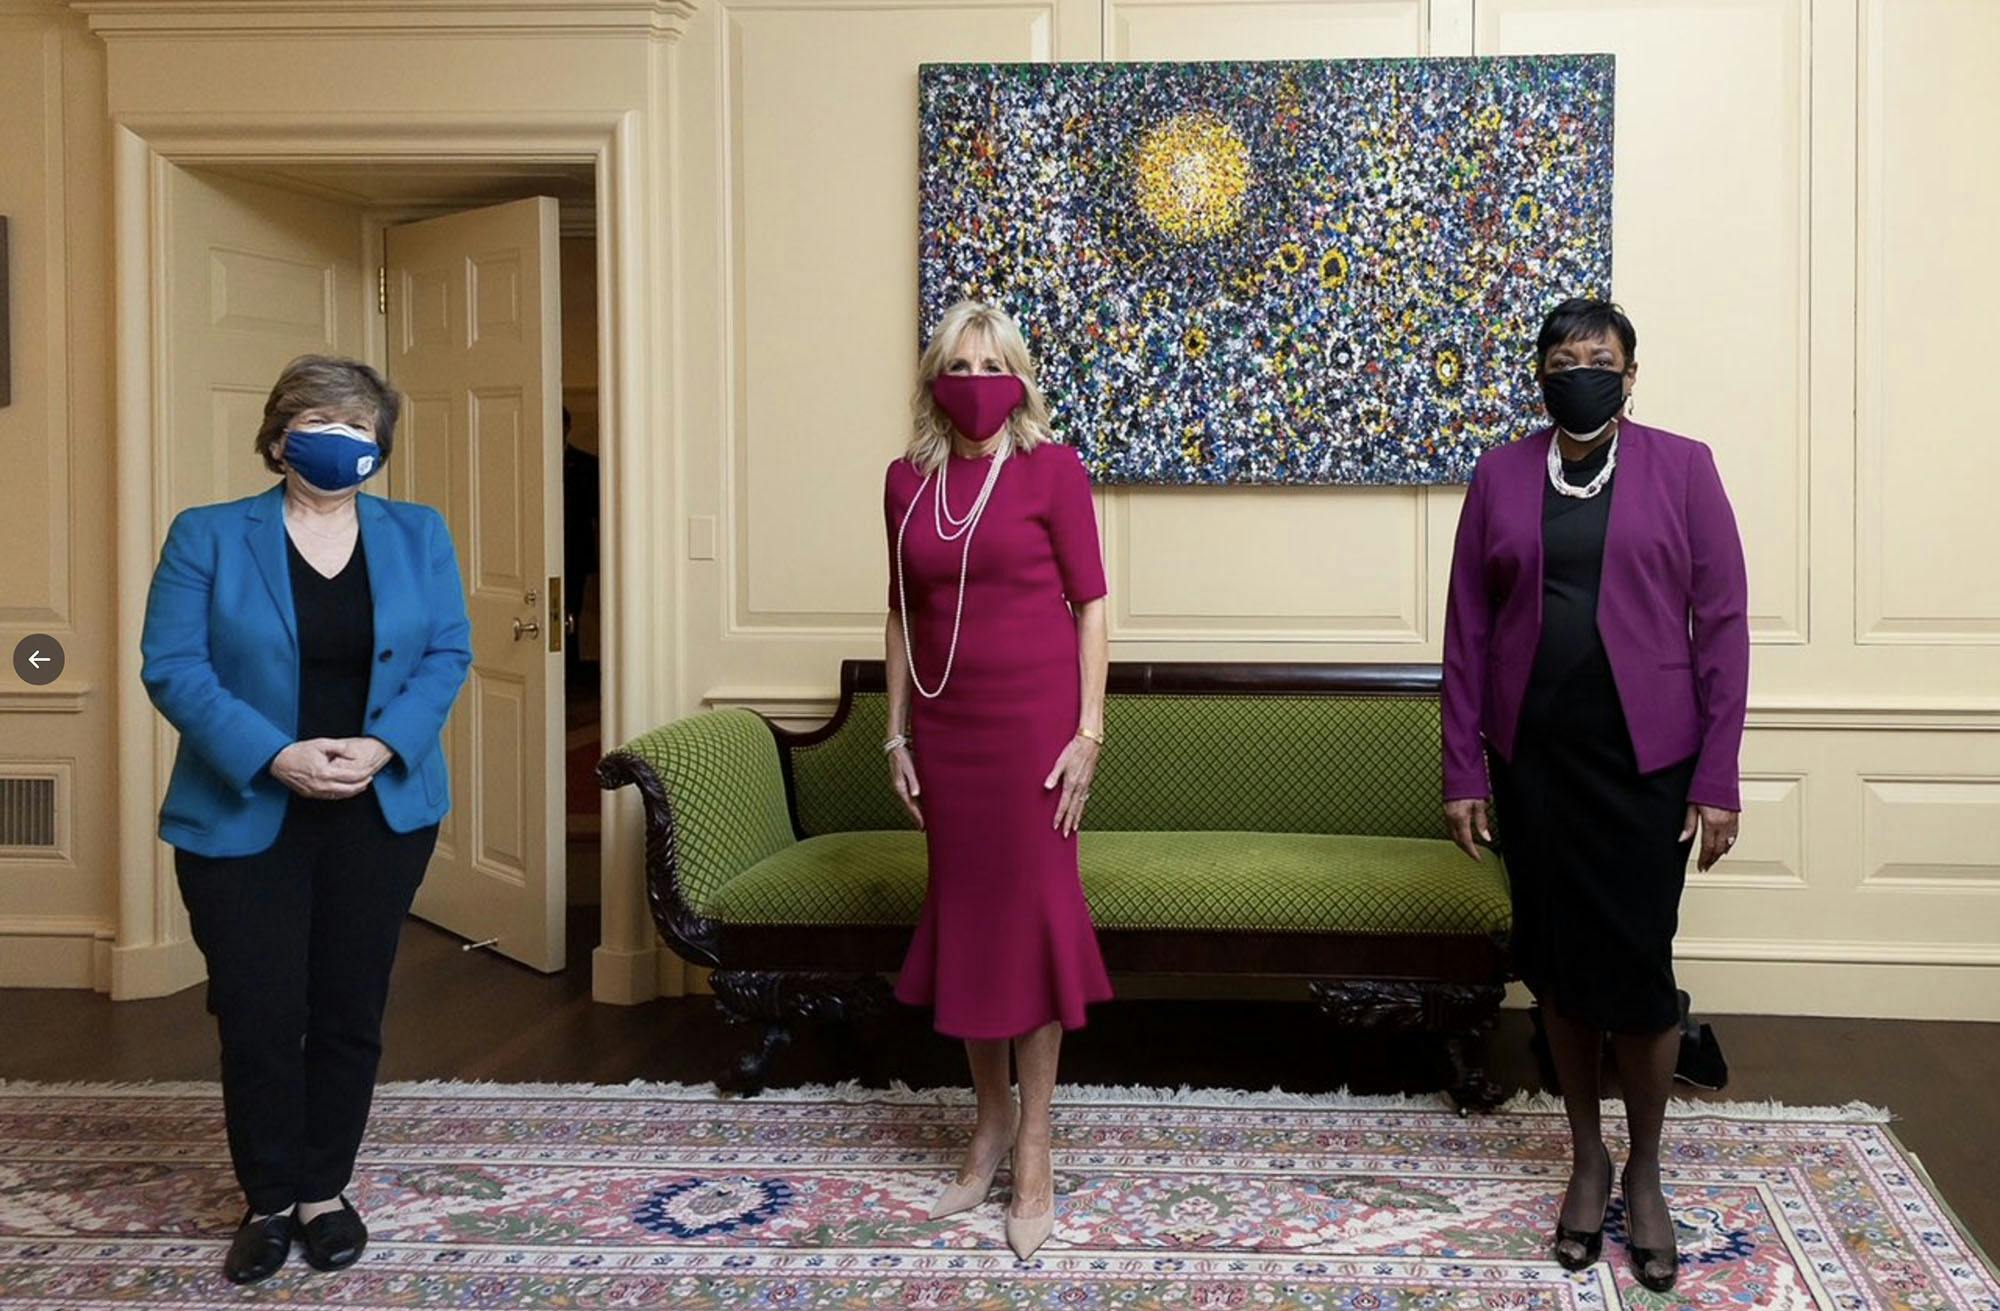 Dr. Jill Biden, Becky Pringle, and Randi Weingarten at the White House with Dance of Earth and Stars, January 21, 2021. – The Richard Pousette-Dart Foundation